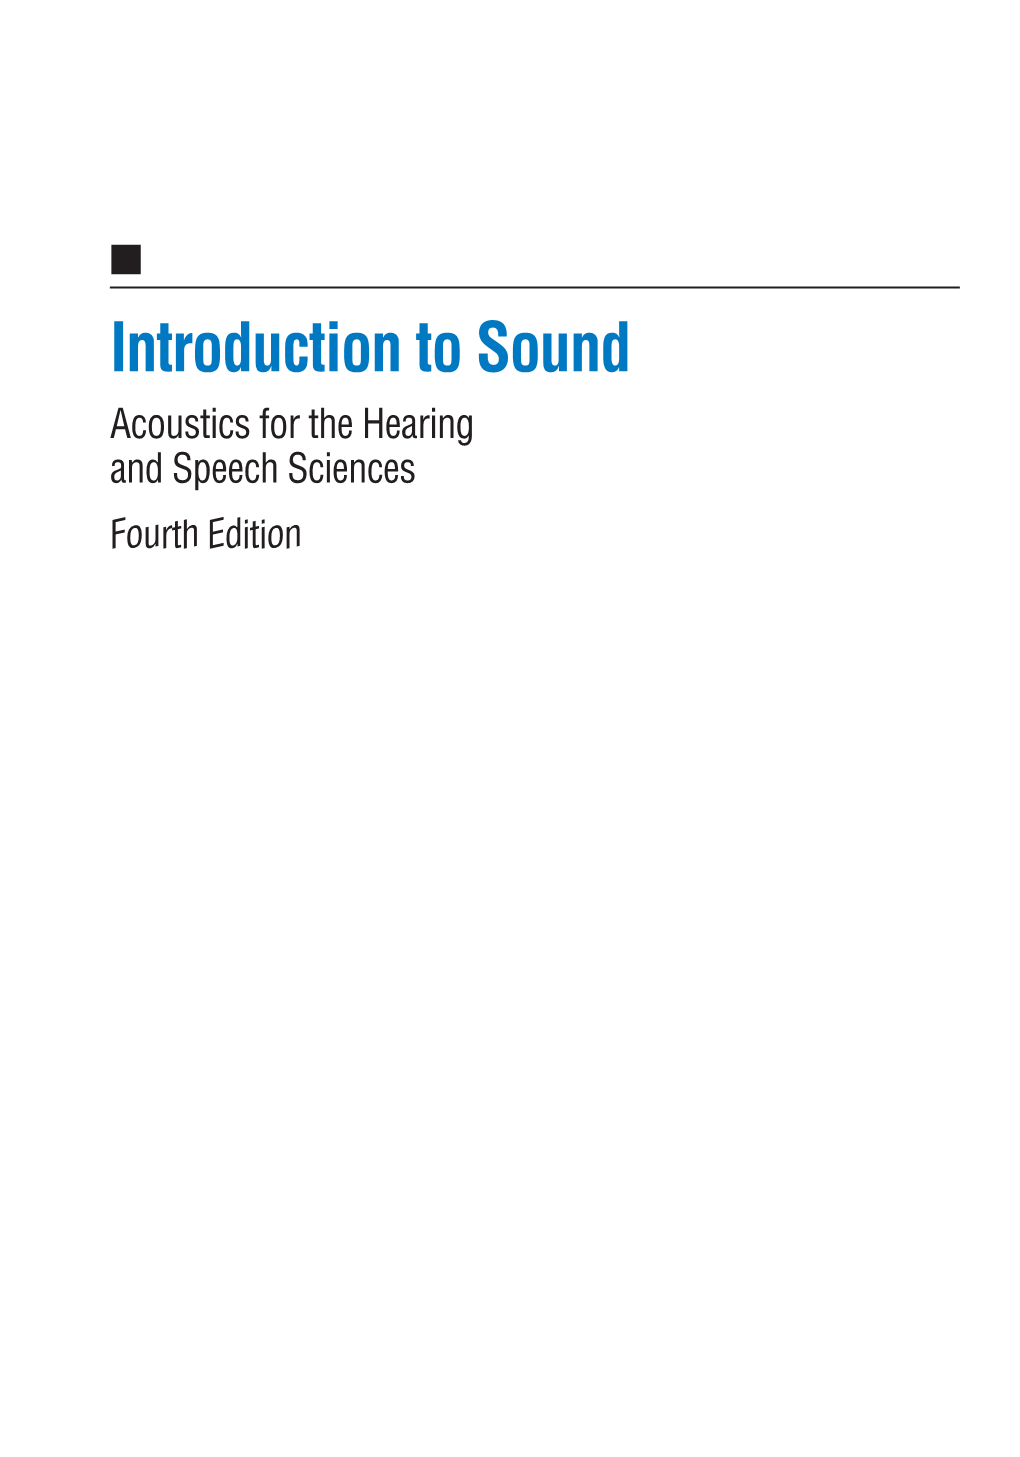 Introduction to Sound Acoustics for the Hearing and Speech Sciences Fourth Edition Editor-In-Chief for Audiology Brad A